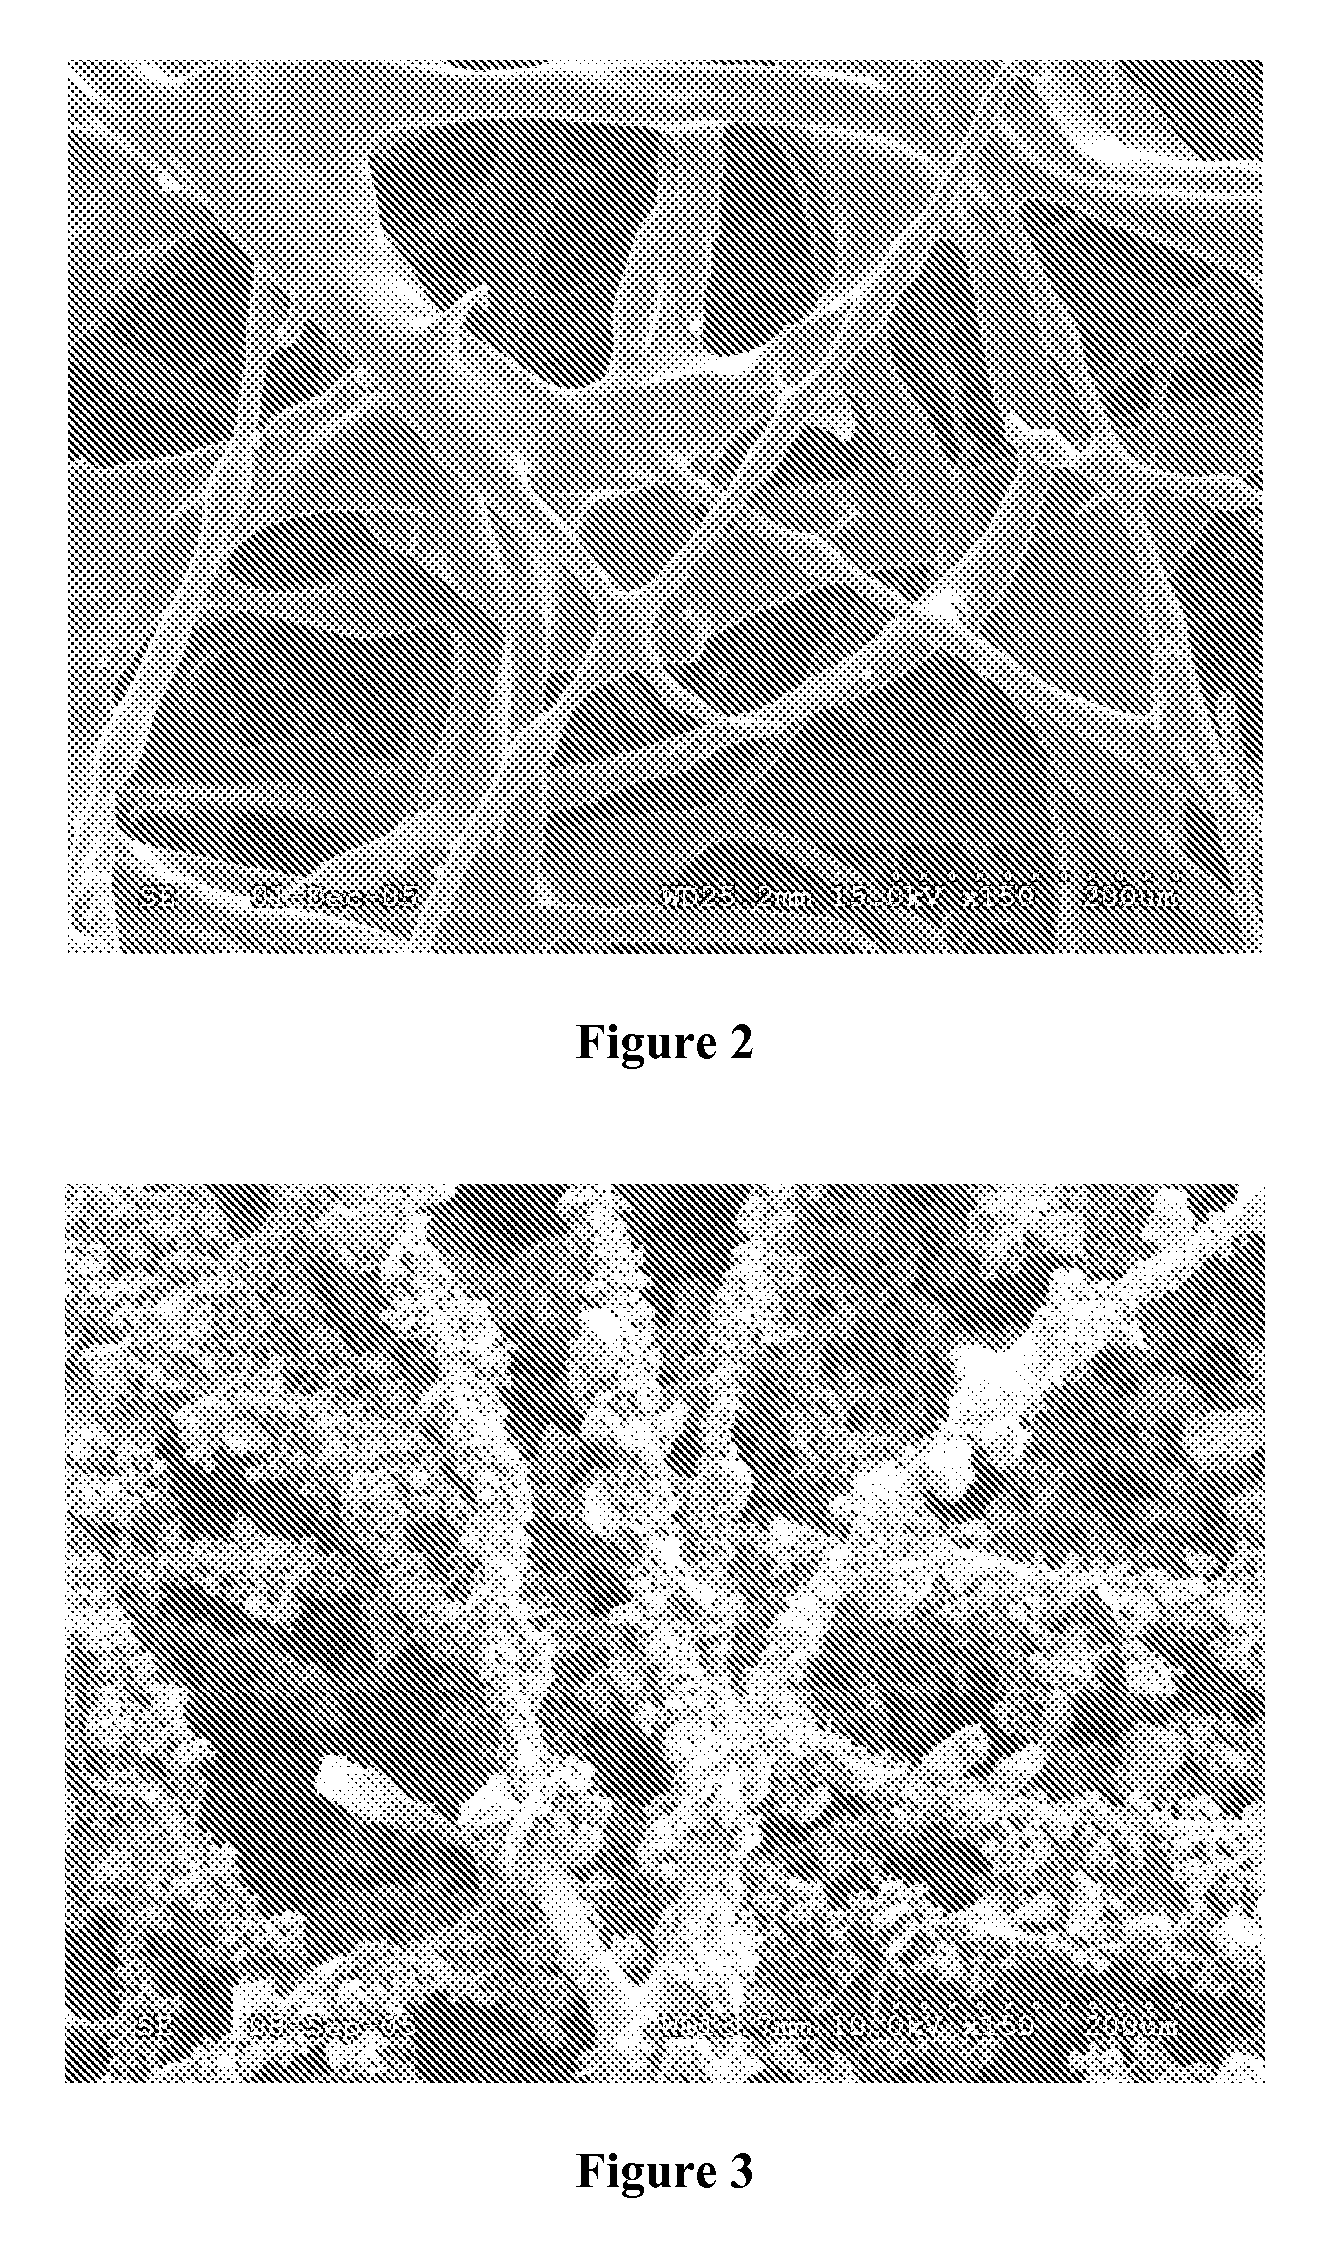 Tacky allergen trap and filter medium, and method for containing allergens